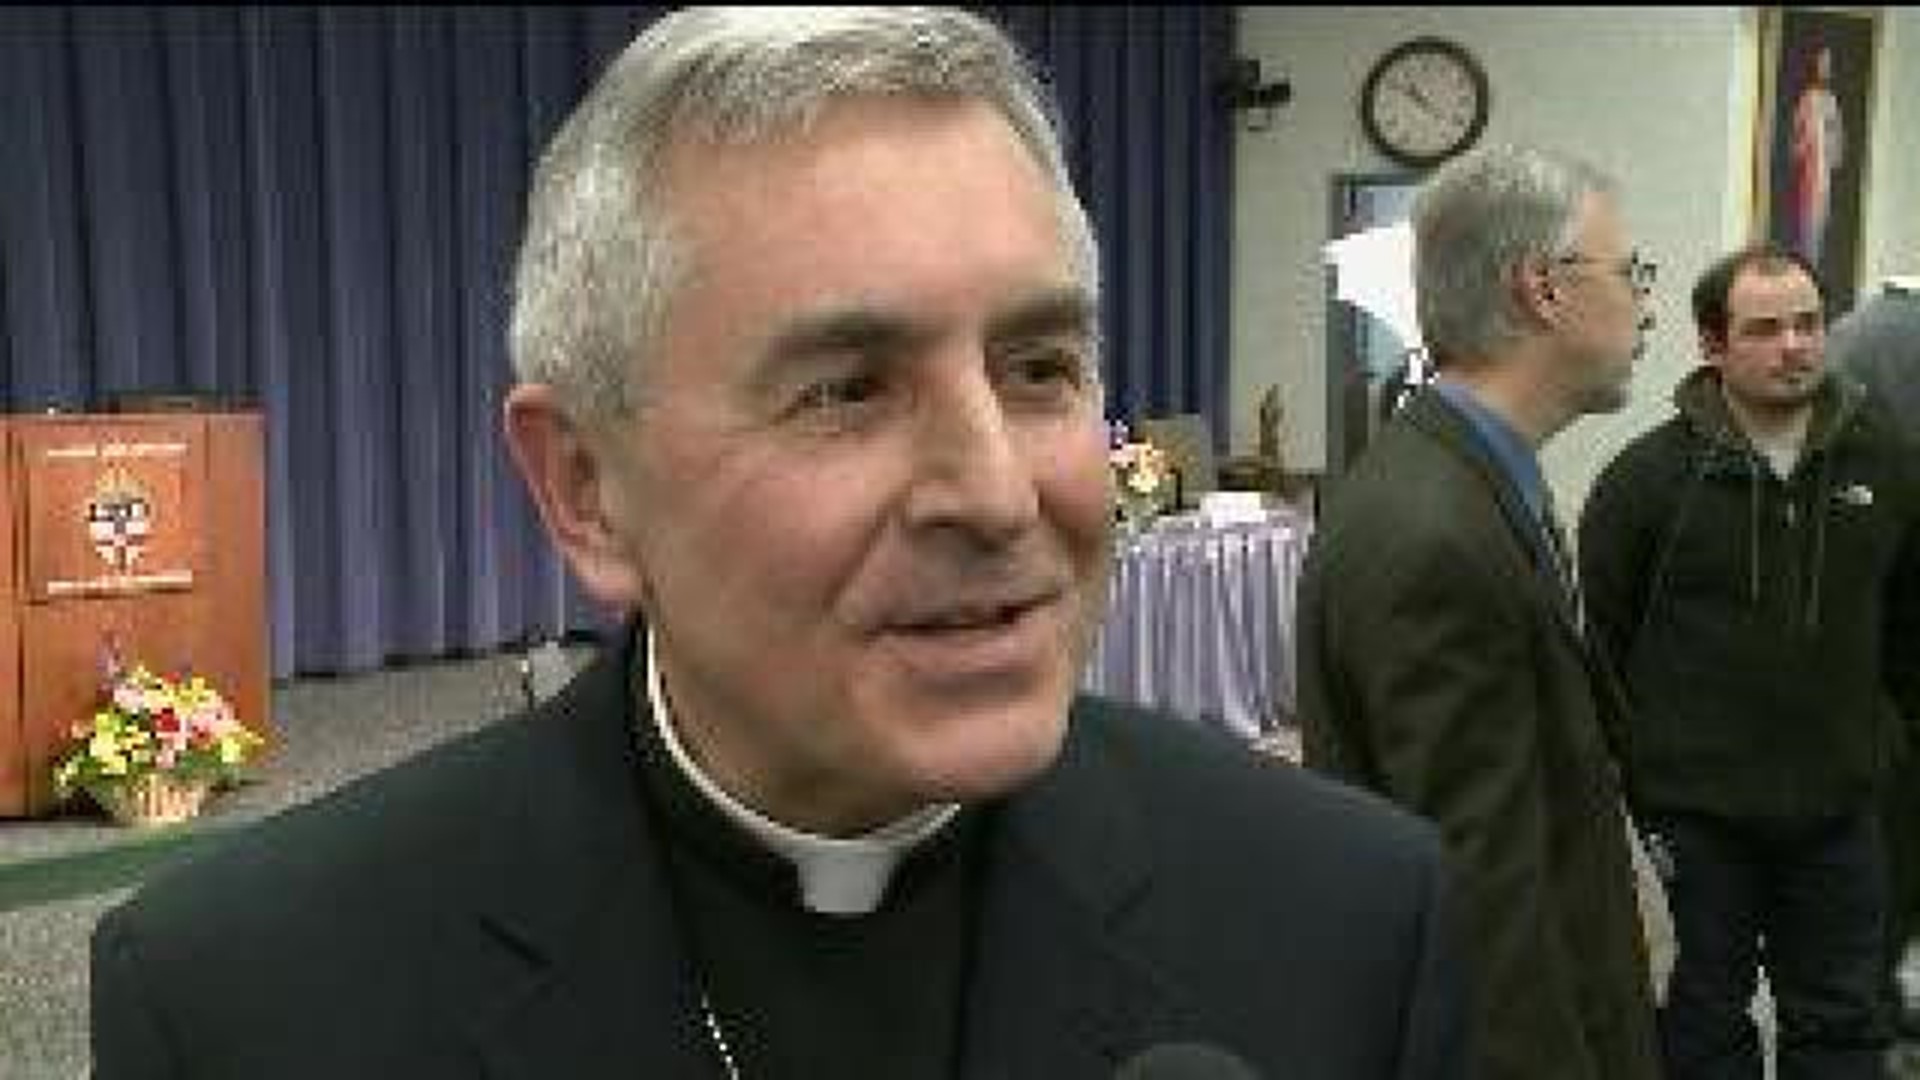 Bishop Appointed to Diocese of Harrisburg